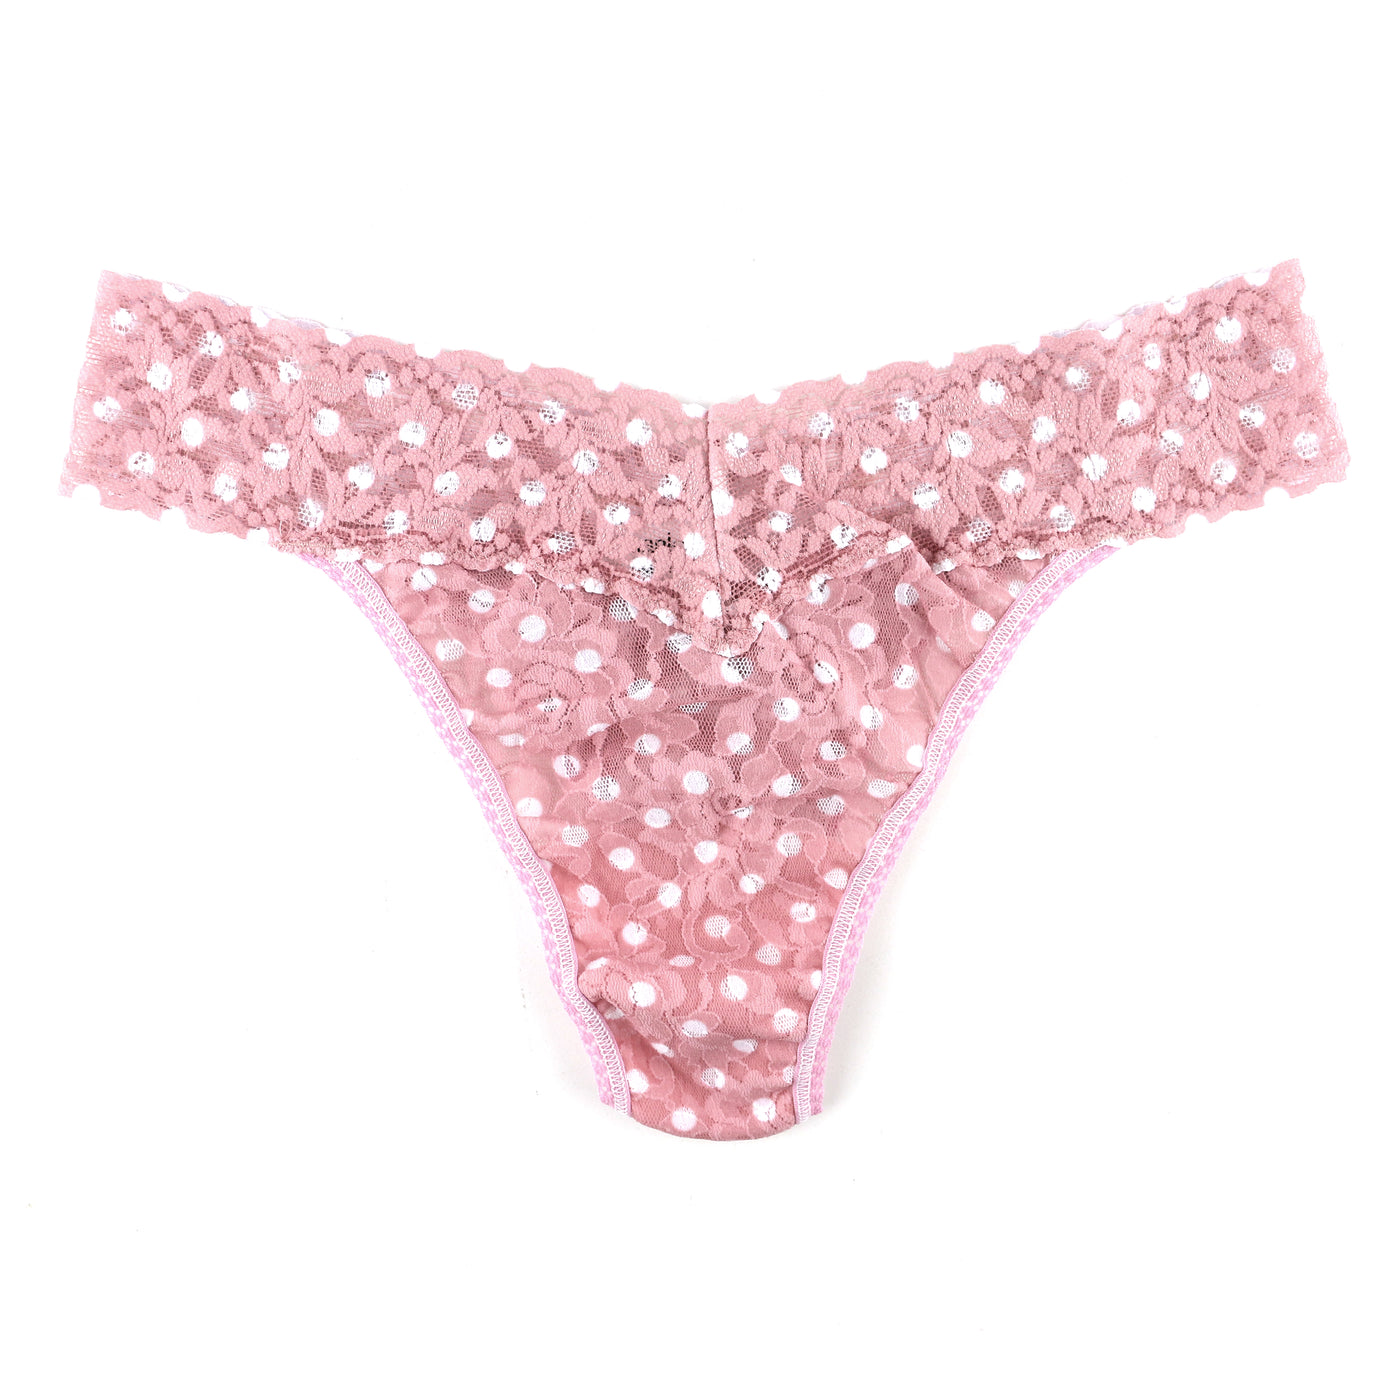 Signature Lace Original Rise Thong - Pink Frosting